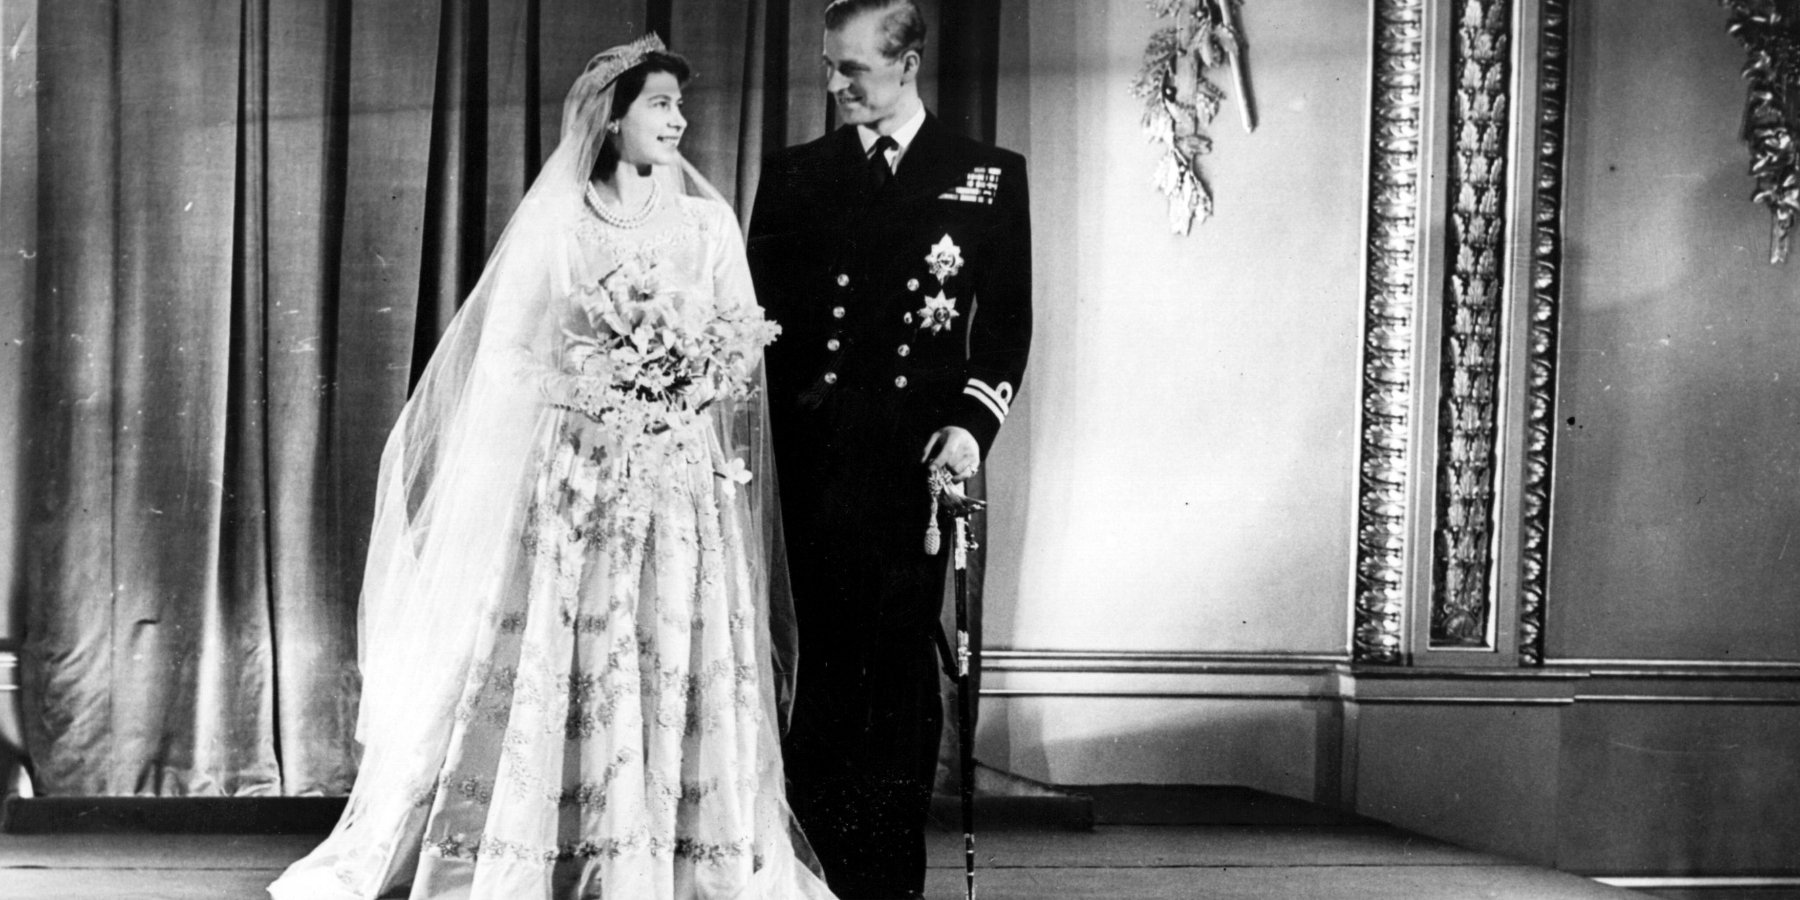 Queen Elizabeth and Prince Philip on their wedding day on Nov. 20, 1947.